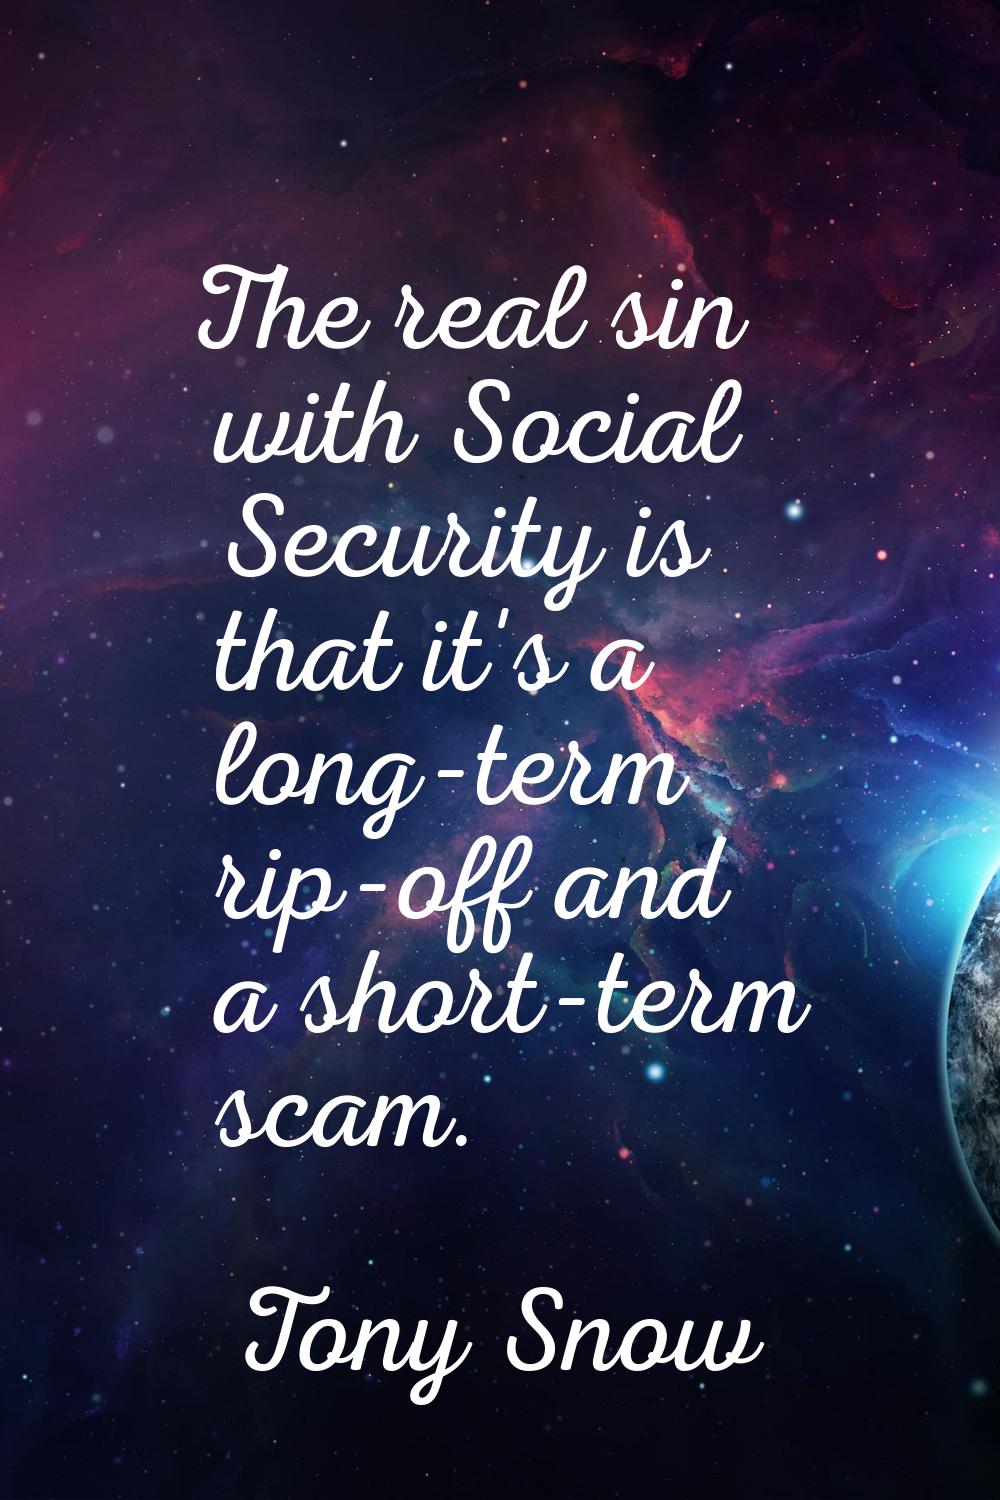 The real sin with Social Security is that it's a long-term rip-off and a short-term scam.